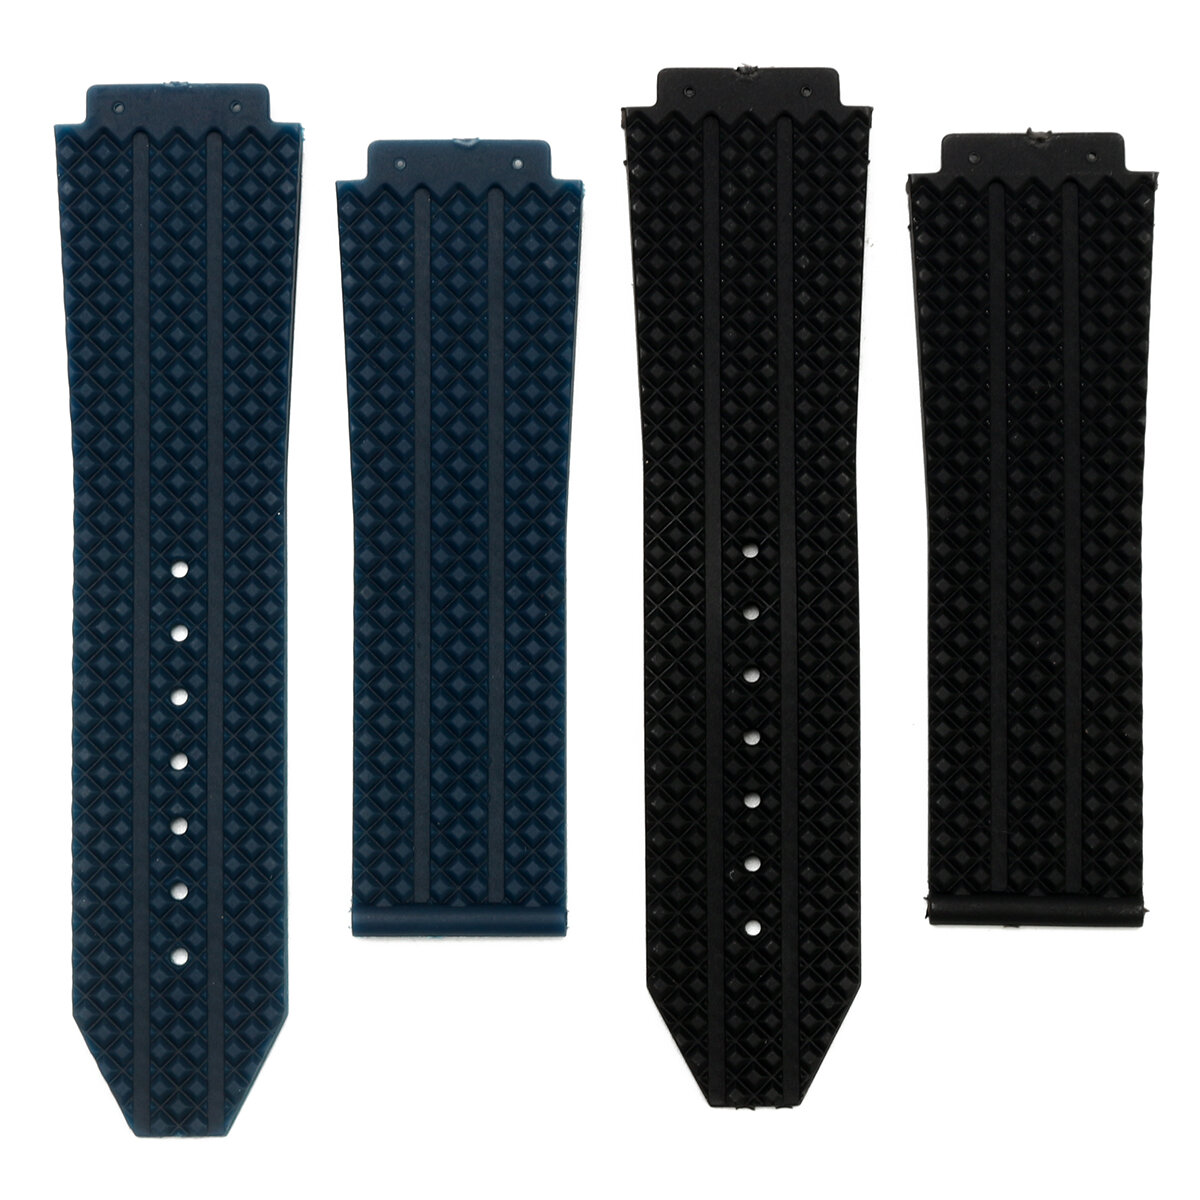 25mm Replacement Black Blue Silicone Rubber Watch Band Strap For Hublot